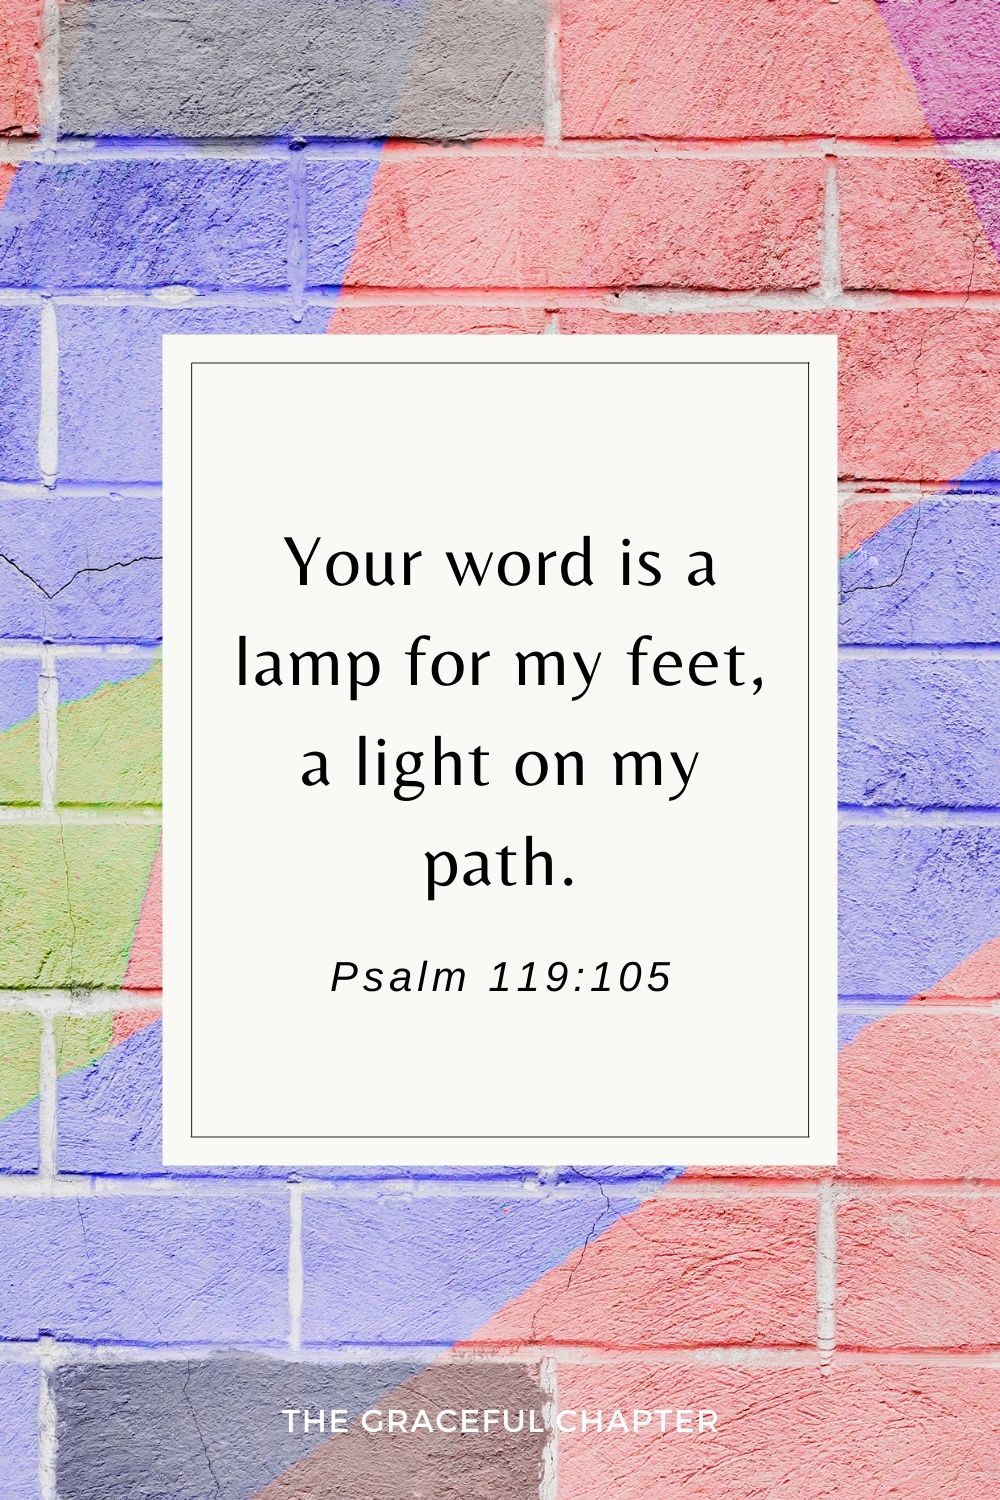 Your word is a lamp for my feet, a light on my path. Psalm 119:105